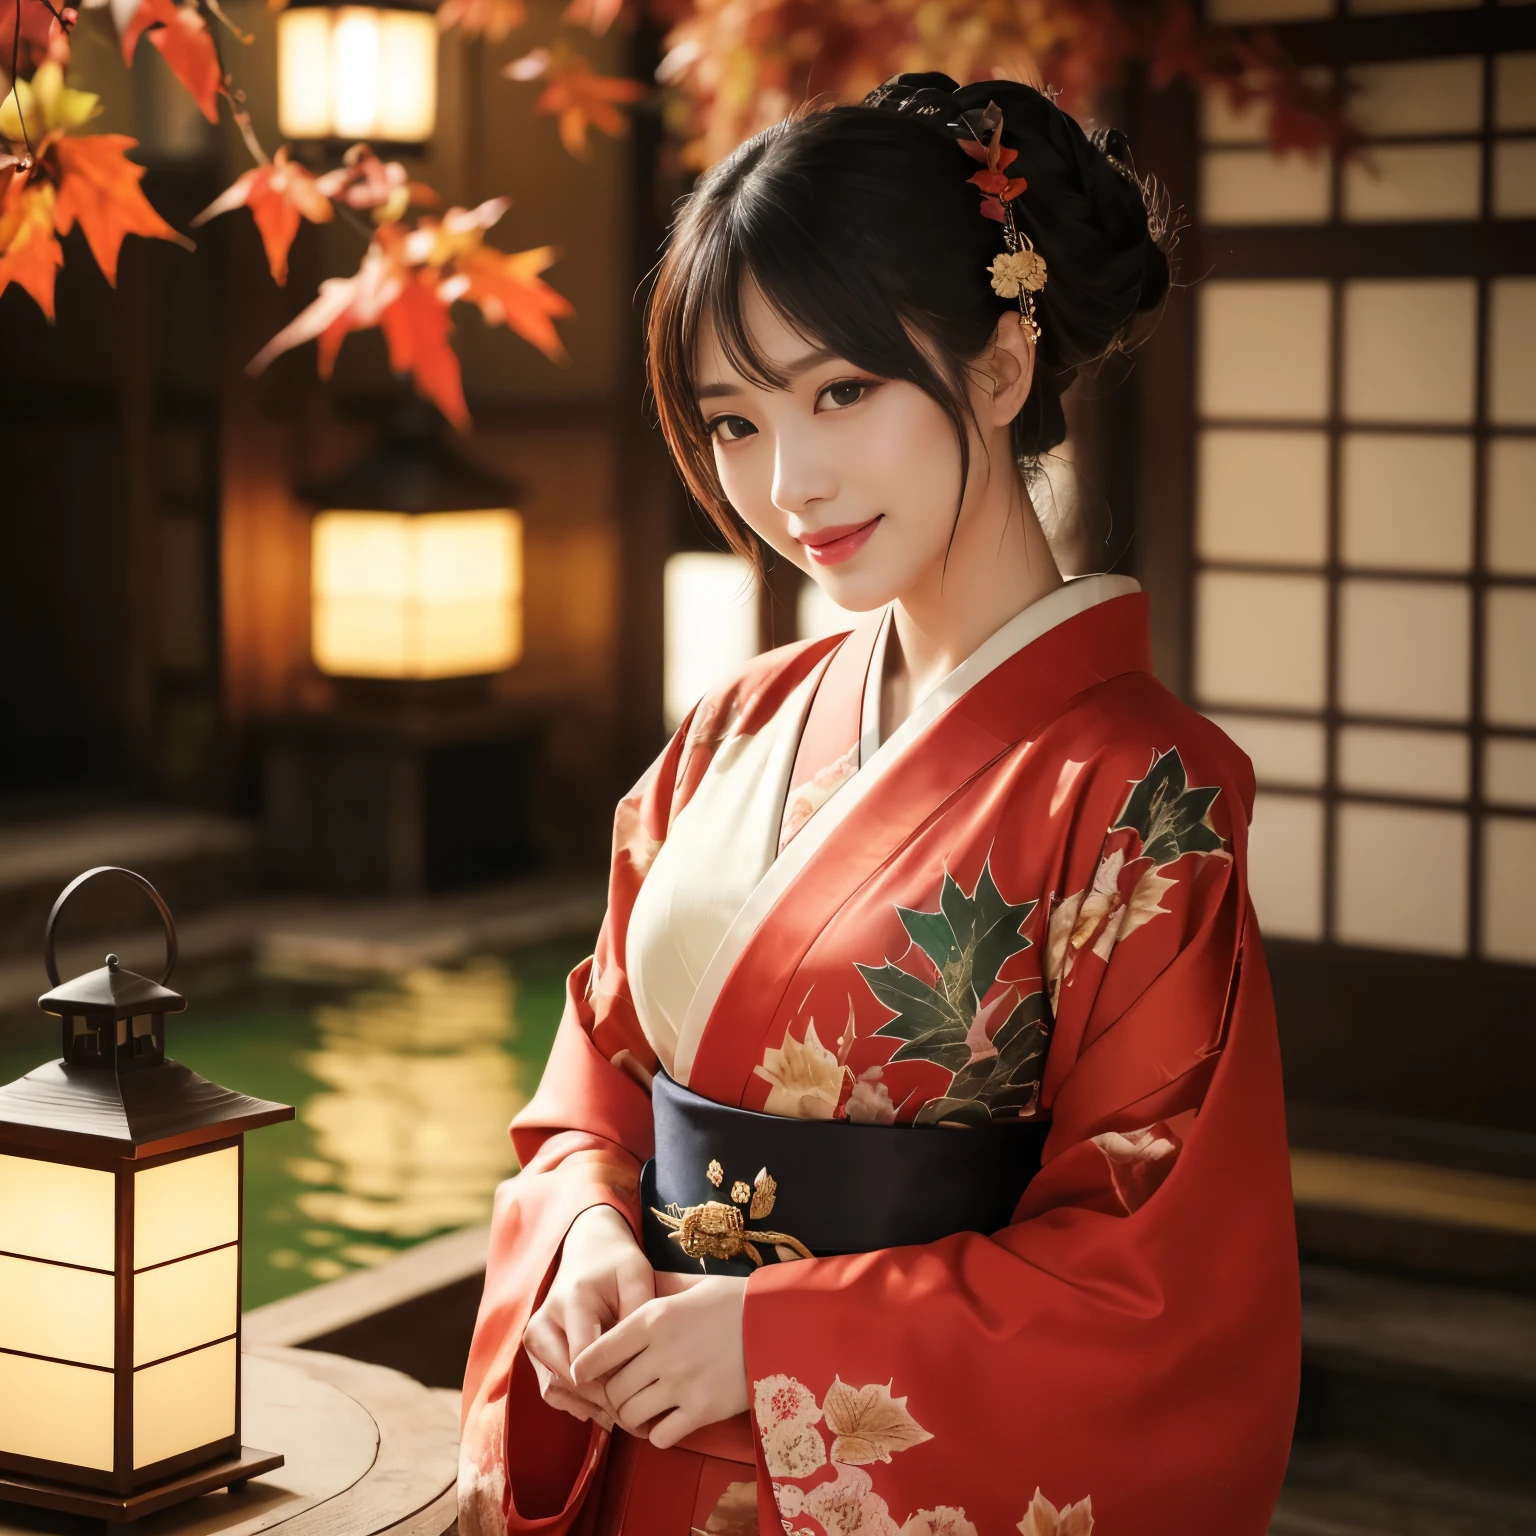 ((highest quality、table top、8K、best image quality、very intricate and detailed details))、1 prostitute、Oiran kimono、Oiran kimono、Accurate Oiran kimono、Gorgeous Oiran kimono、The background is the garden of a luxury hot spring inn...、smile at the camera、Photo from the waist up、((red autumn leaves、red autumn leaves、Autumn foliage))、Japanese garden、(Stone lantern)、(hot spring)、1 lantern、(Corridor of the inn、Japanese-style ryokan)、midnight、Cloudy、lantern light、red lipstick、long eyelashes、perfect makeup、dark night、naked and wearing only a kimono、detailed face